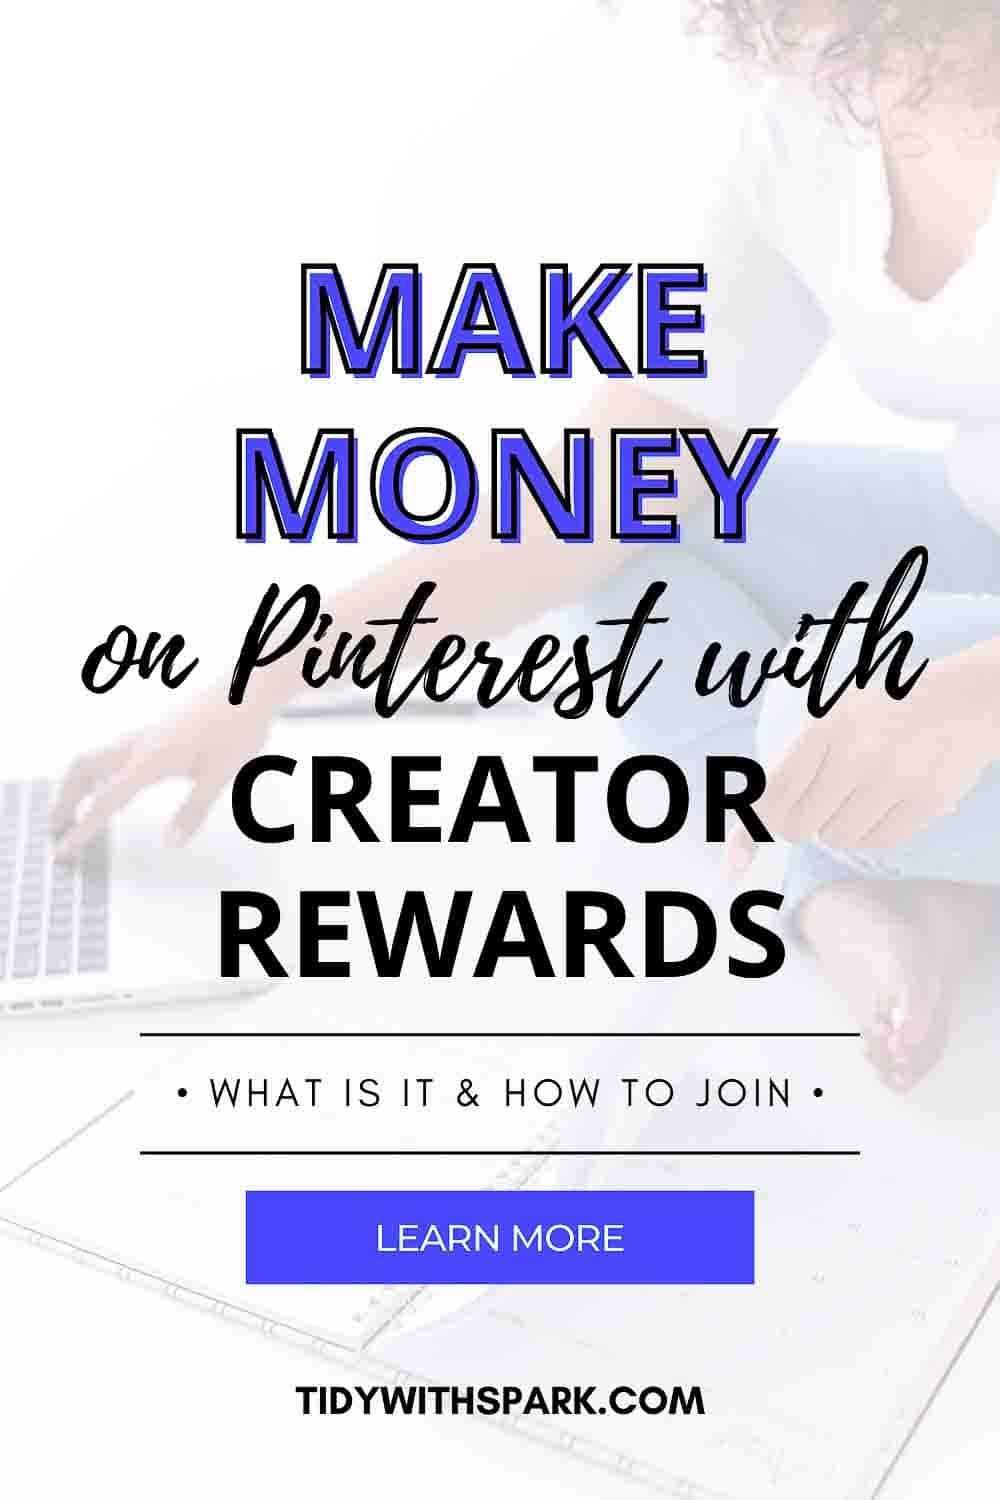 Promotional image for Creator Rewards Pinterest for tidy with spark blog